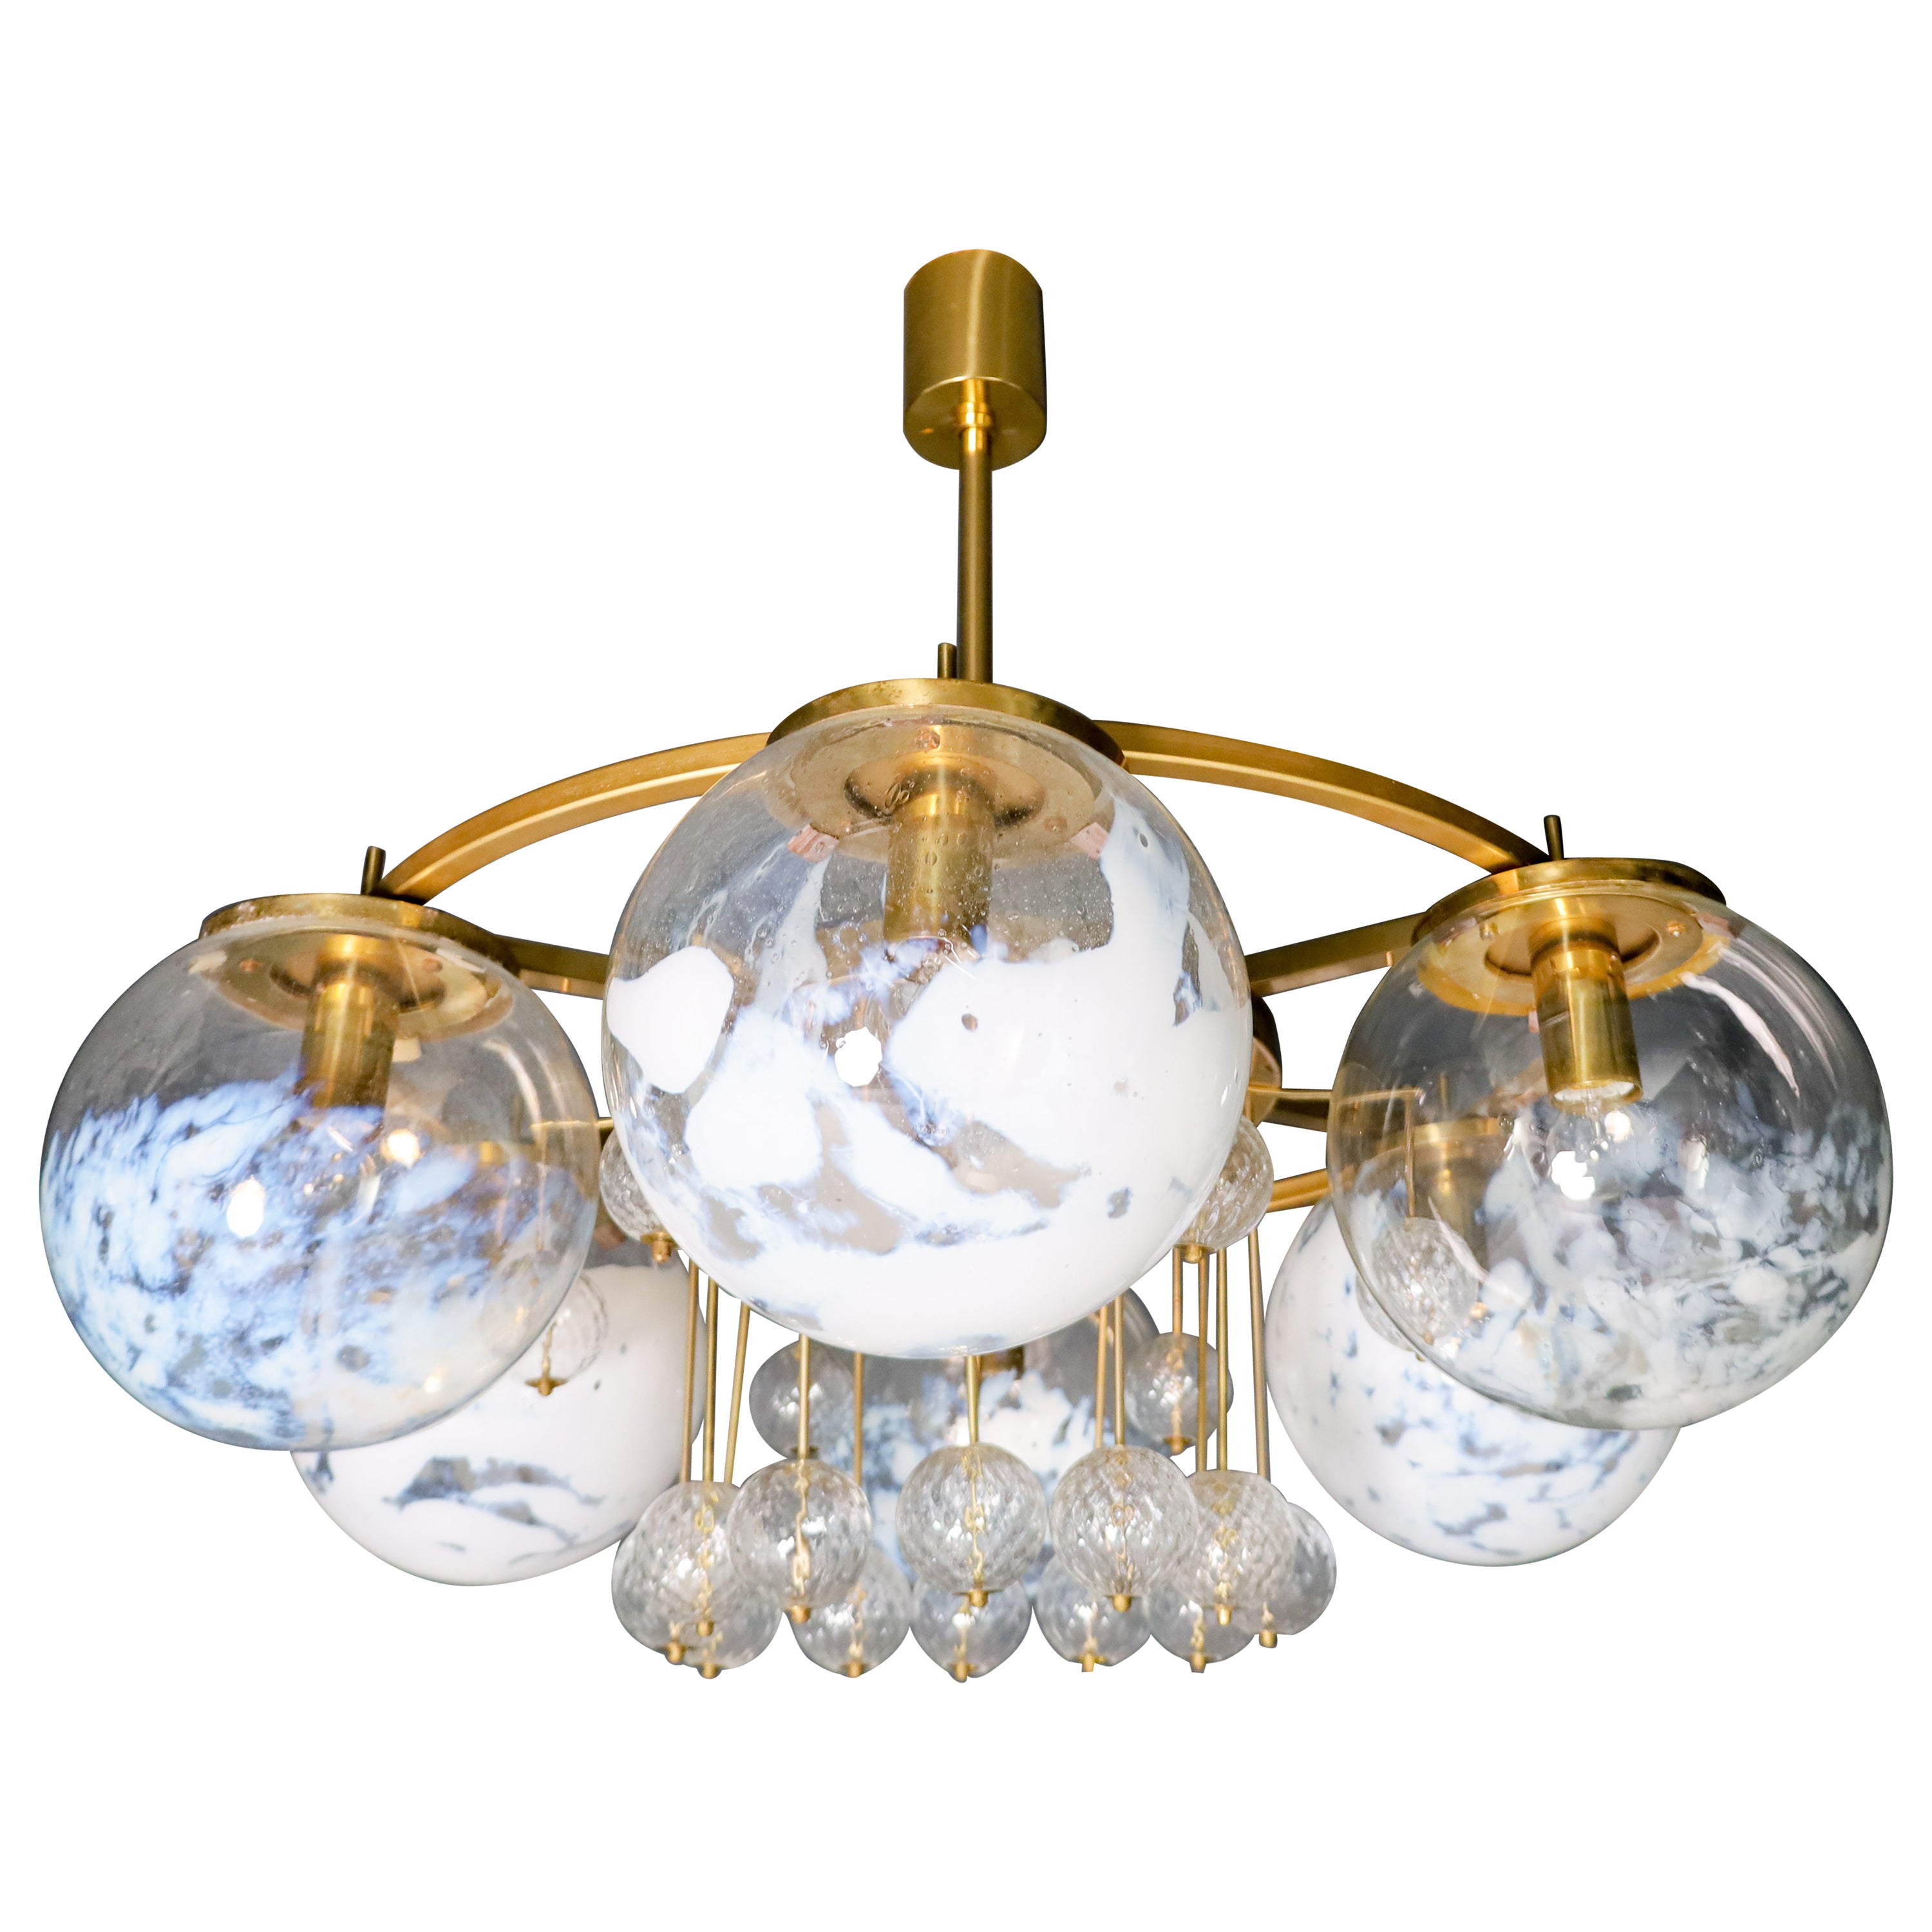 Large Hotel Chandelier in Brass and Hand Blown Glass 1950s